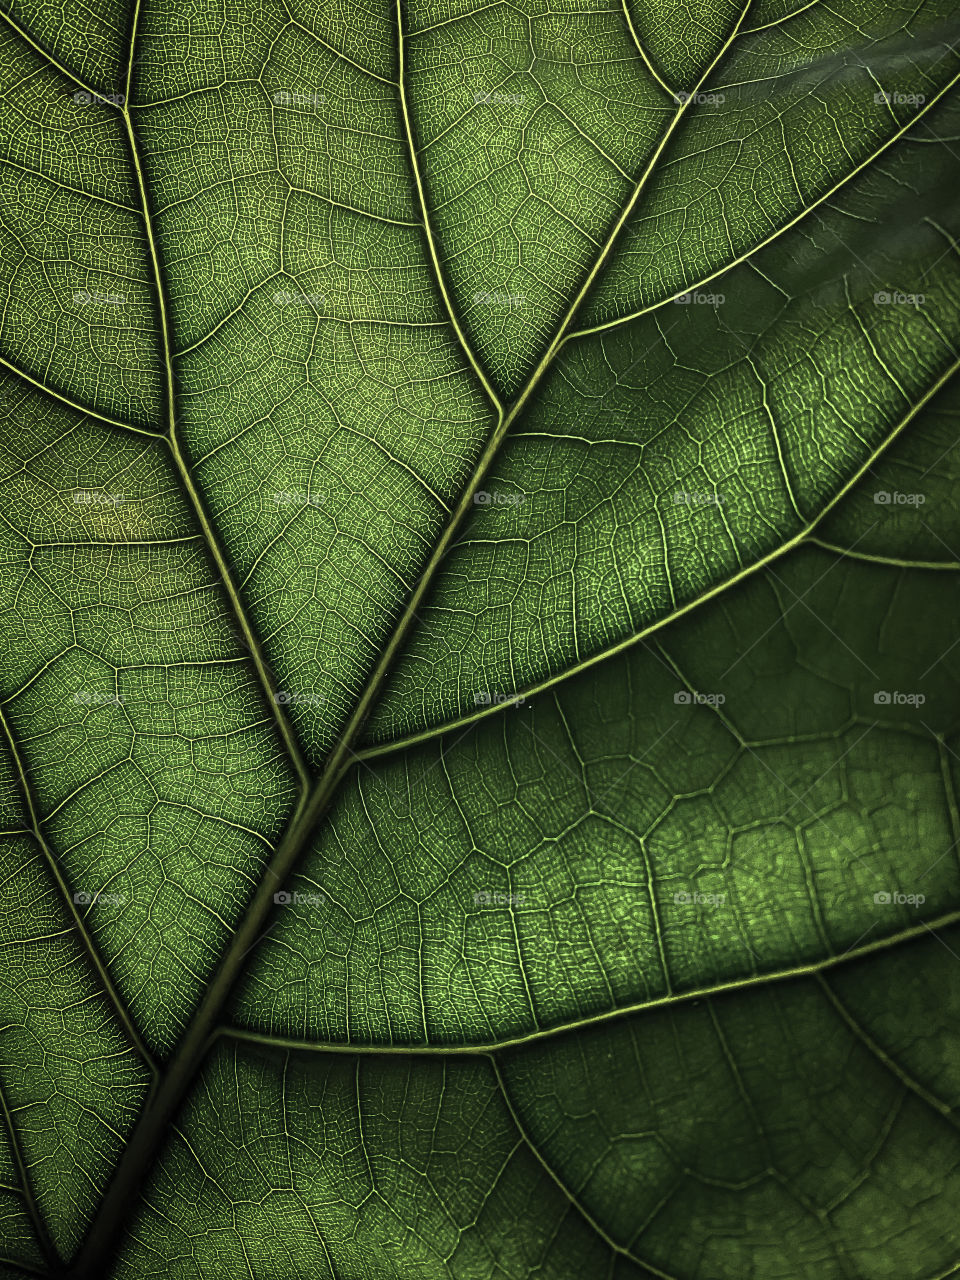 Ficus lyrata leaf structure as the background